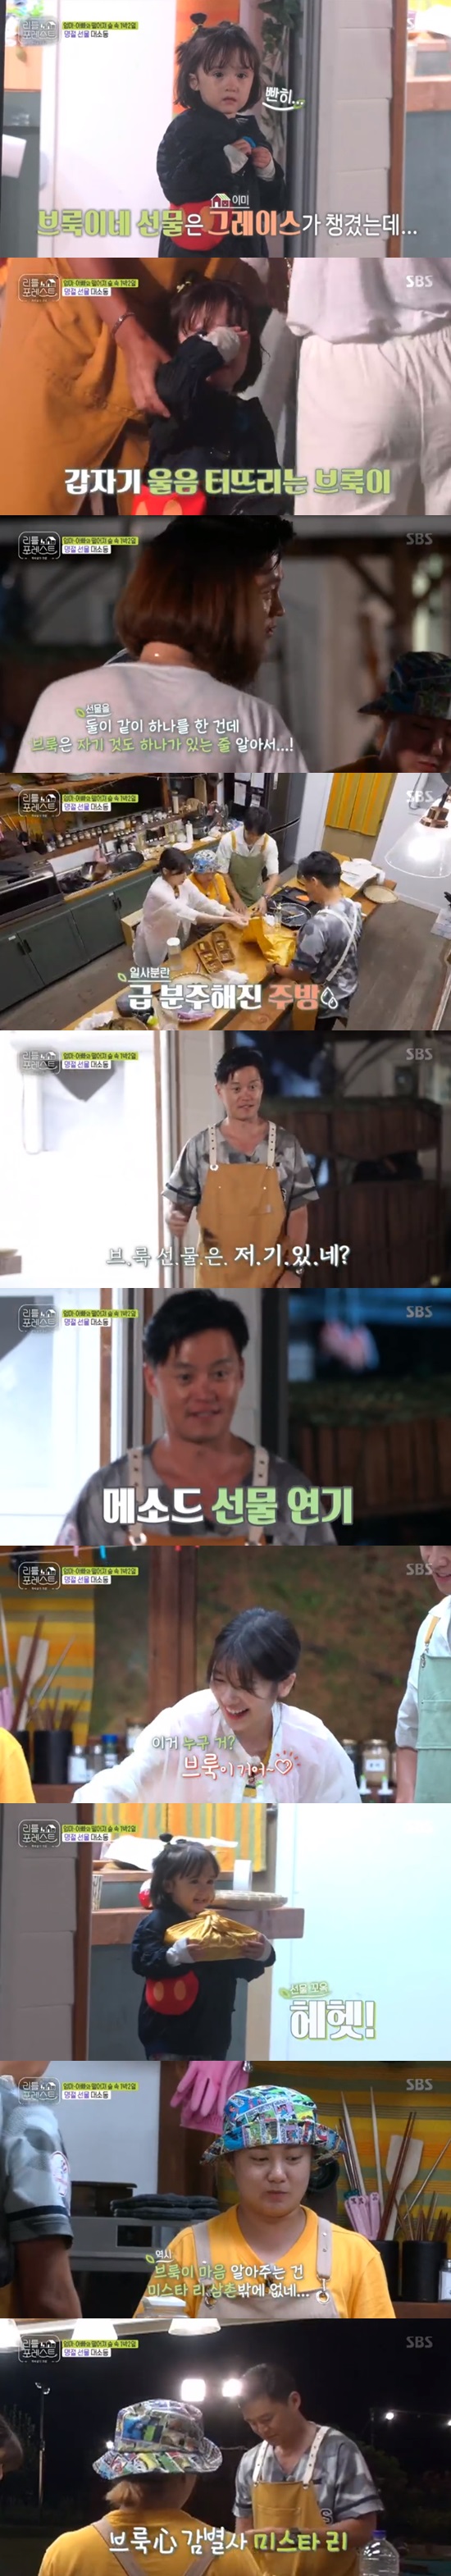 Lee Seo-jin certified Brooke Baraghy, pinching exactly why Brooke (5) is crying.Lee Seo-jin correctly understood why Brooke was crying on SBS Little Forest broadcast on September 17.On this day, Lee Seo-jin Lee Seung-gi Park Na-rae Jung So-min went out to the market with the children.When the children fell asleep in the car toward the market, Lee Seung-gi found a sedentary restourant that could put the sleeping children to sleep, and decided to see the market with the children who woke up.The children ate rice cakes at rice cakes and had various experiences as an aquarium for large fish tanks.After the market outing, the preparations for Chuseok food began. Park Na-rae was transferred to the main axis, and Songpyeon was made with the children.When preparing for the holiday food, Lee Seo-jin said, If you have a child married, you will have a college student. Younger juniors have a college student son.I got married when I was a college student. Lee Seung-gi made Songpyeon pretty and then laughed at her daughters stupid declaration according to the myth that she would have a pretty daughter if she made Songpyeon beautifully.Lee Seo-jin grumpyly said, I will have your son, and Park Na-rae admired Songpyeon, which Lee Seung-gi made.So the food was completed and the parents of the children arrived.The handmade criminal record and Songpyeon were packed with gift boxes to be delivered to parents, while the twins Brooke, 5, and Grace, 5, were held in Graces hands.While Brooke was delaying to eat fruit, Grace first boasted a gift box to her mother.When Brooke, who had finished eating the fruit, found the box late, the adults said, There is a box in the Grace box.Brooke burst into tears, and Lee Seo-jin said, I did one with Baro, and Brooke thought she had her own.Lee Seo-jin prepared first aid, saying, Get me one, just pack it now. Park Na-rae said, Its strange if there is nothing too much.I put tomatoes in it, he said, wrapping tomatoes and peppers from the garden.Yoo Gyeong-sang